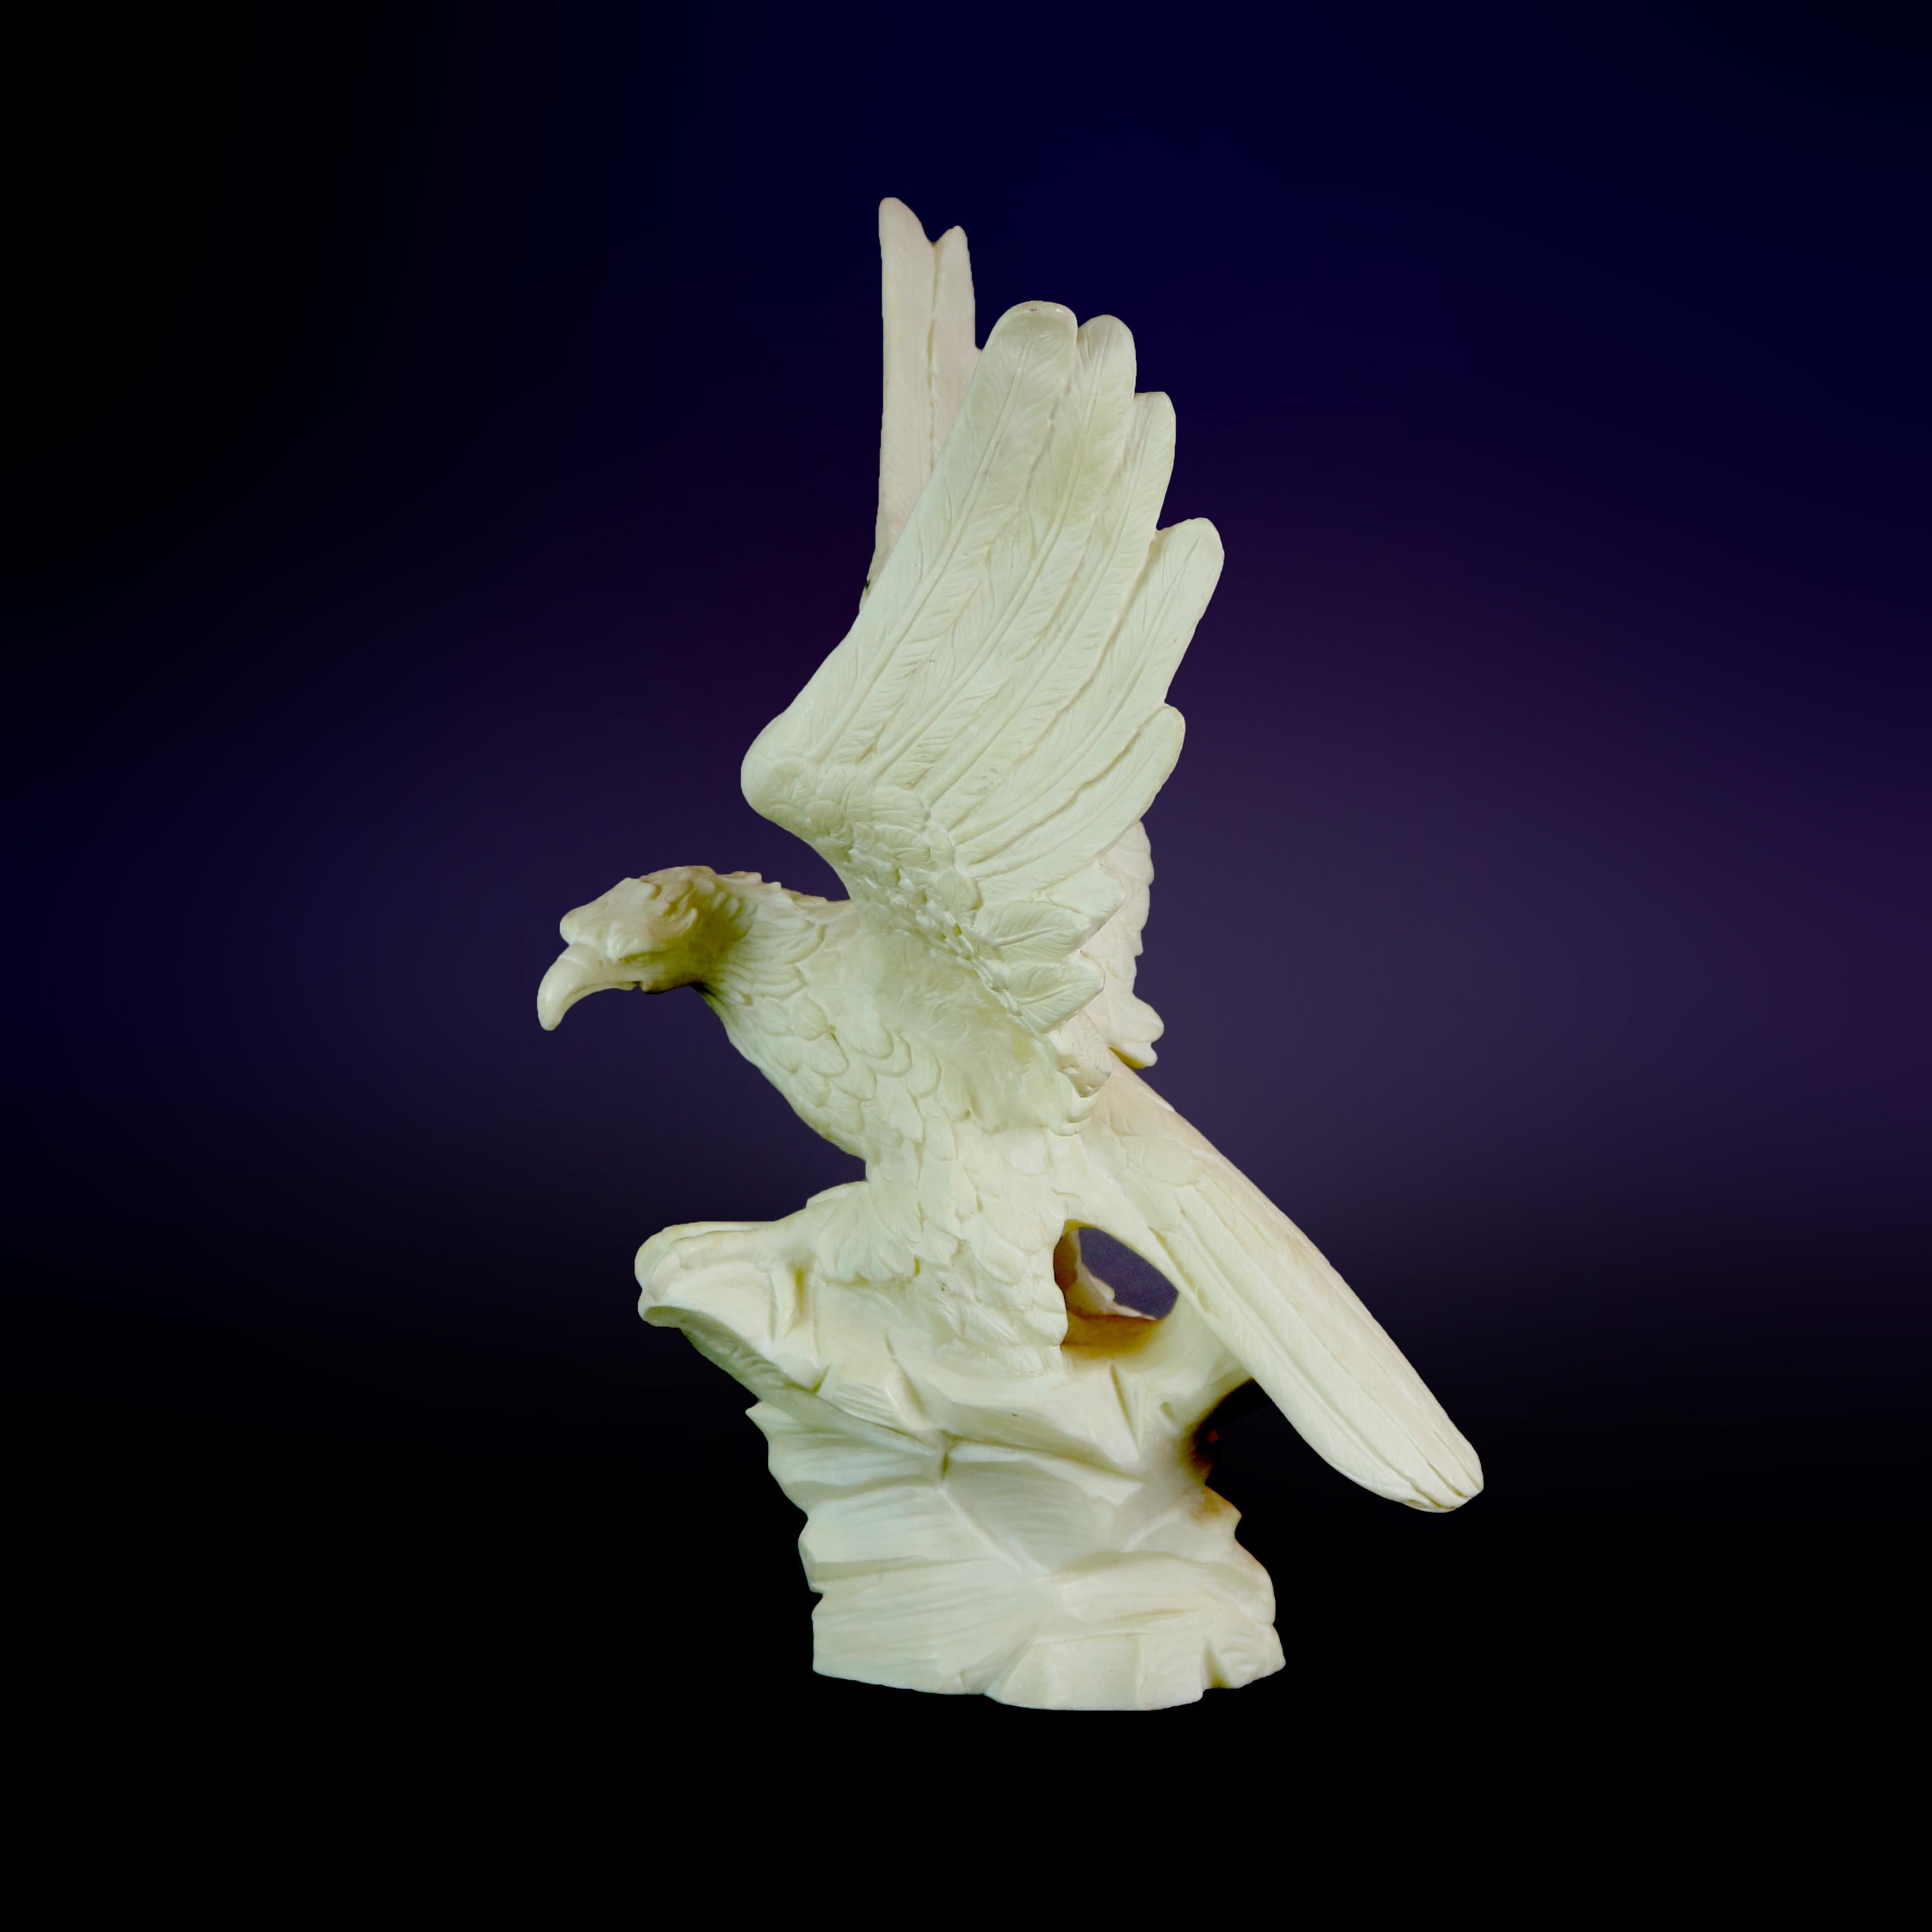 An antique Italian figural sculpture offers carved alabaster depicting an eagle taking flight, original label on base as photographed, 20th century.

Measures: 14.25